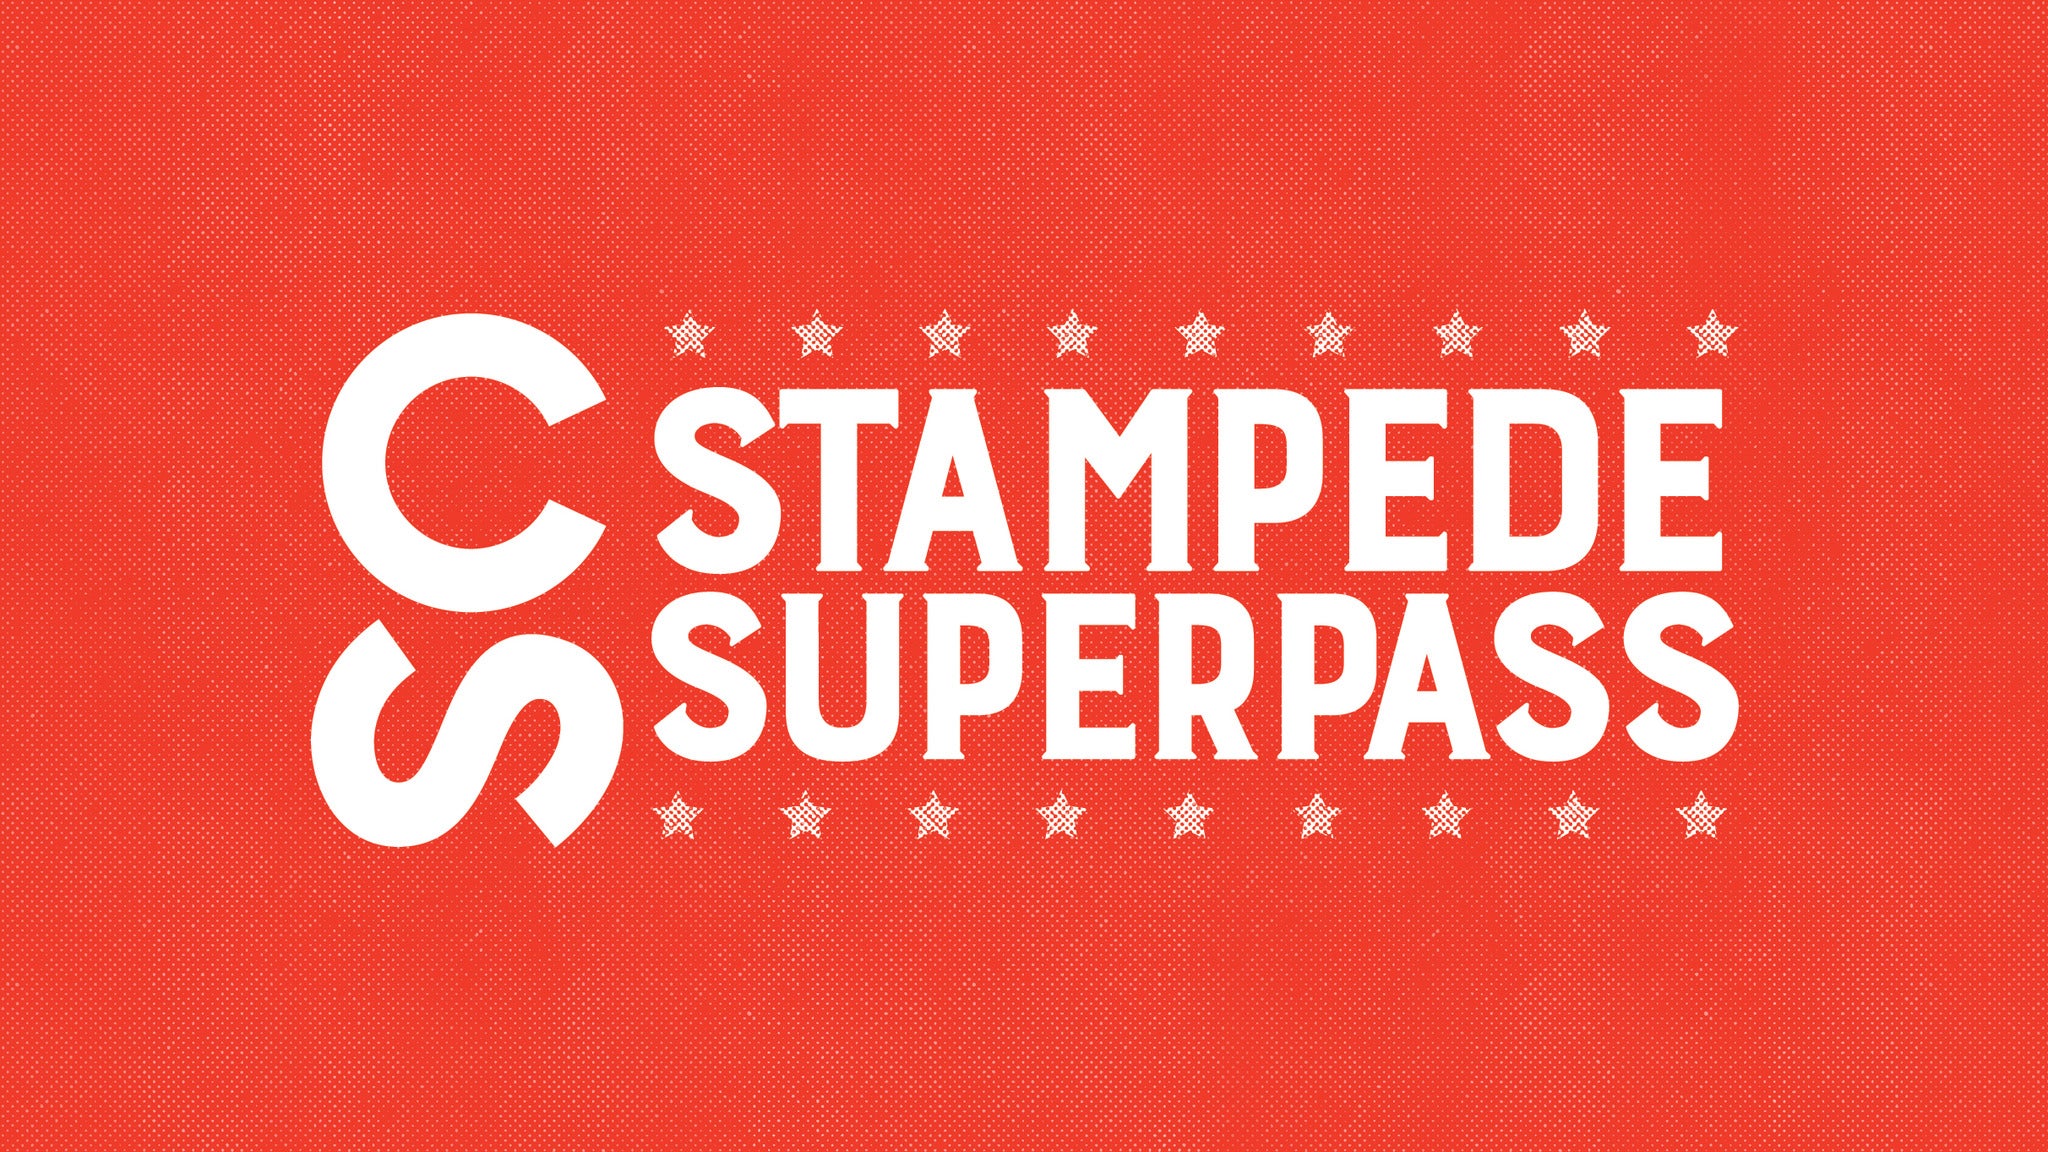 Calgary Stampede Superpass Tickets Single Game Tickets & Schedule